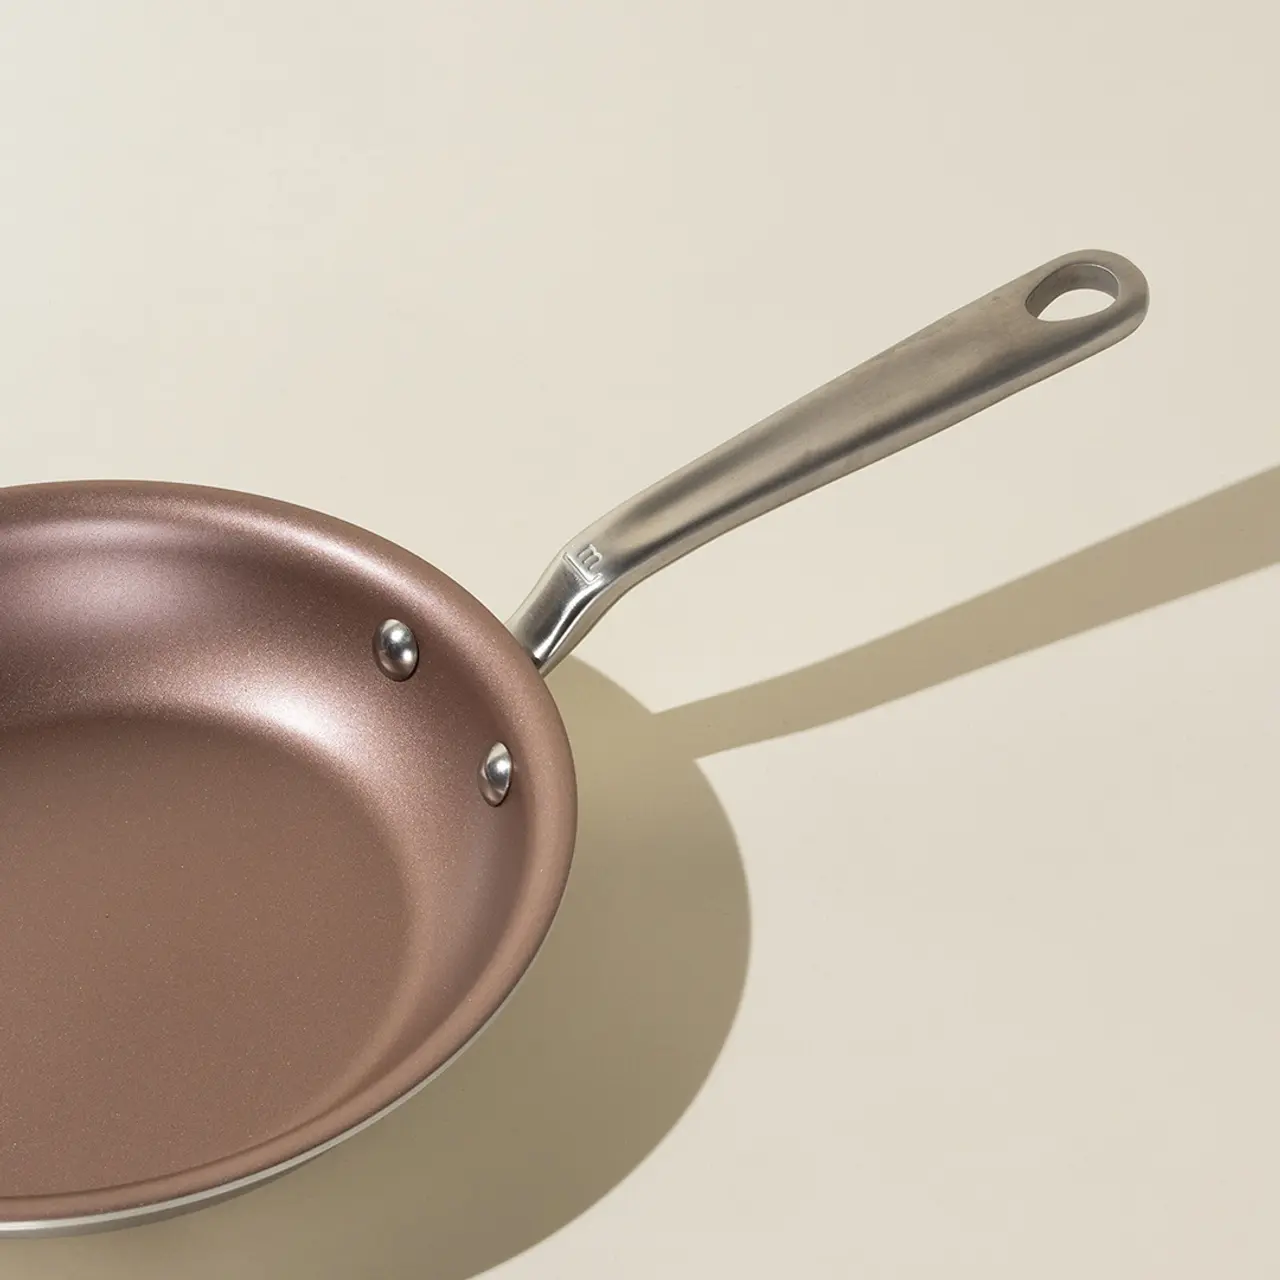 A non-stick frying pan with a stainless steel handle rests on a neutral background, casting a soft shadow.